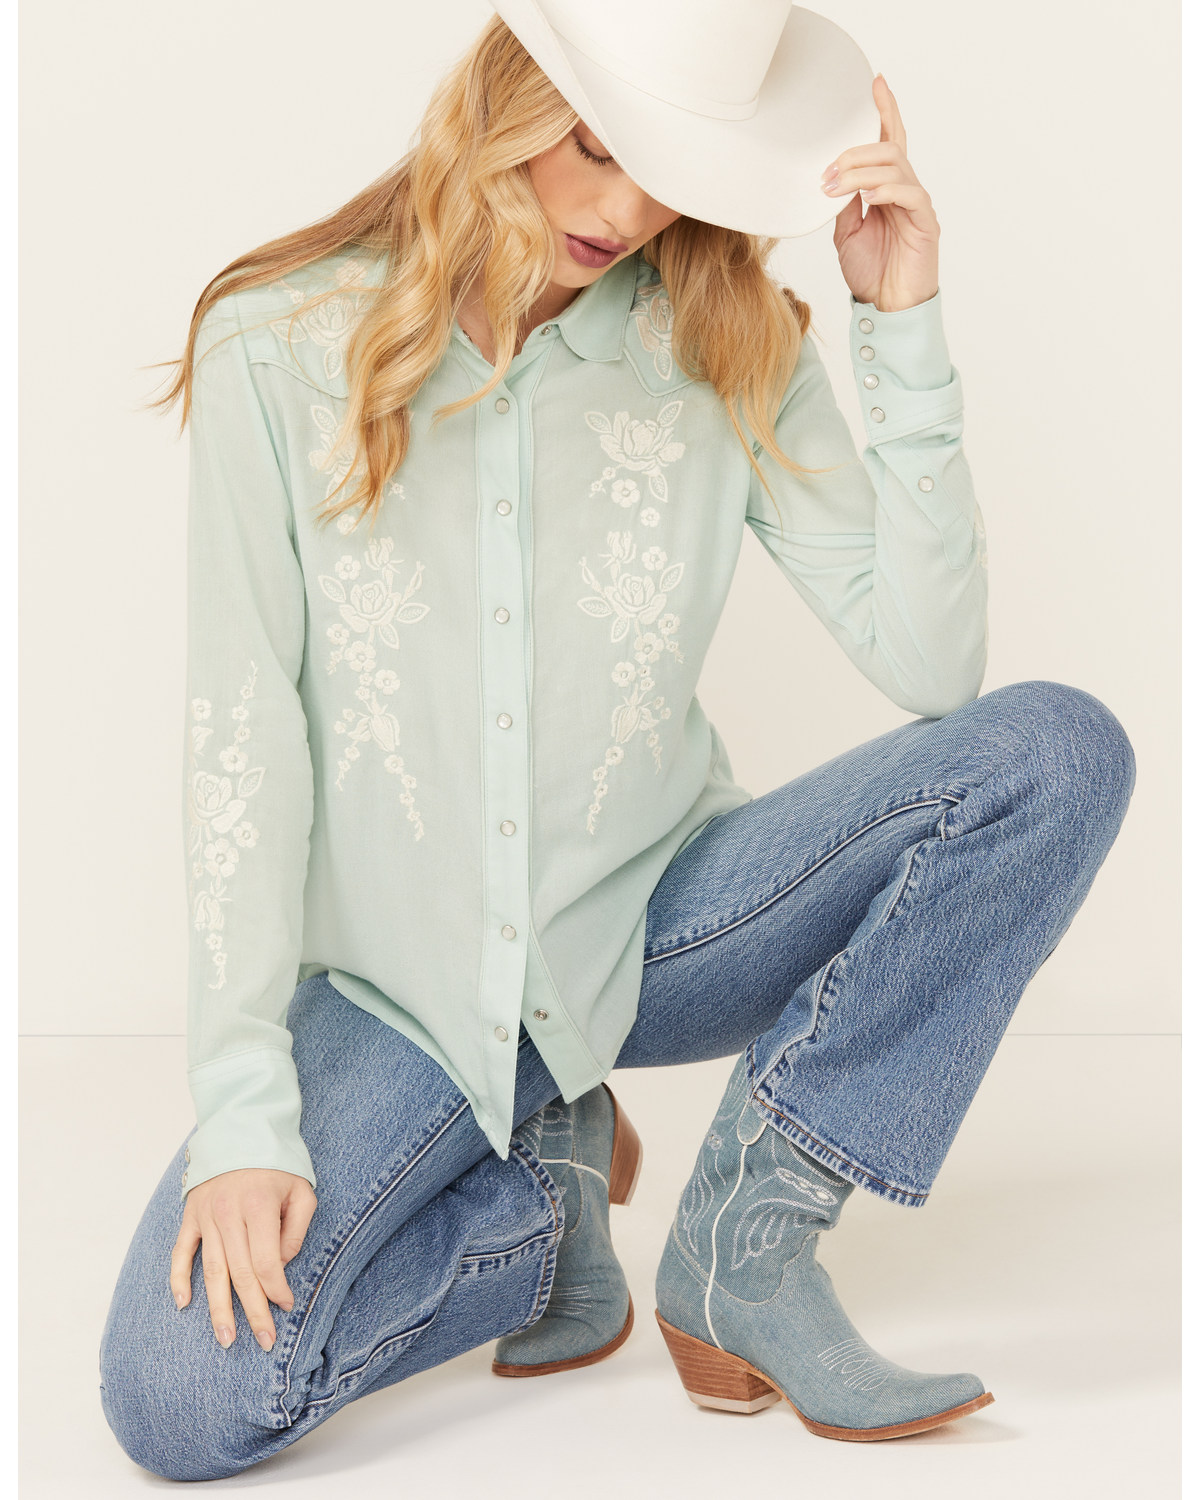 Stetson Women's Embroidered Long Sleeve Snap Western Shirt